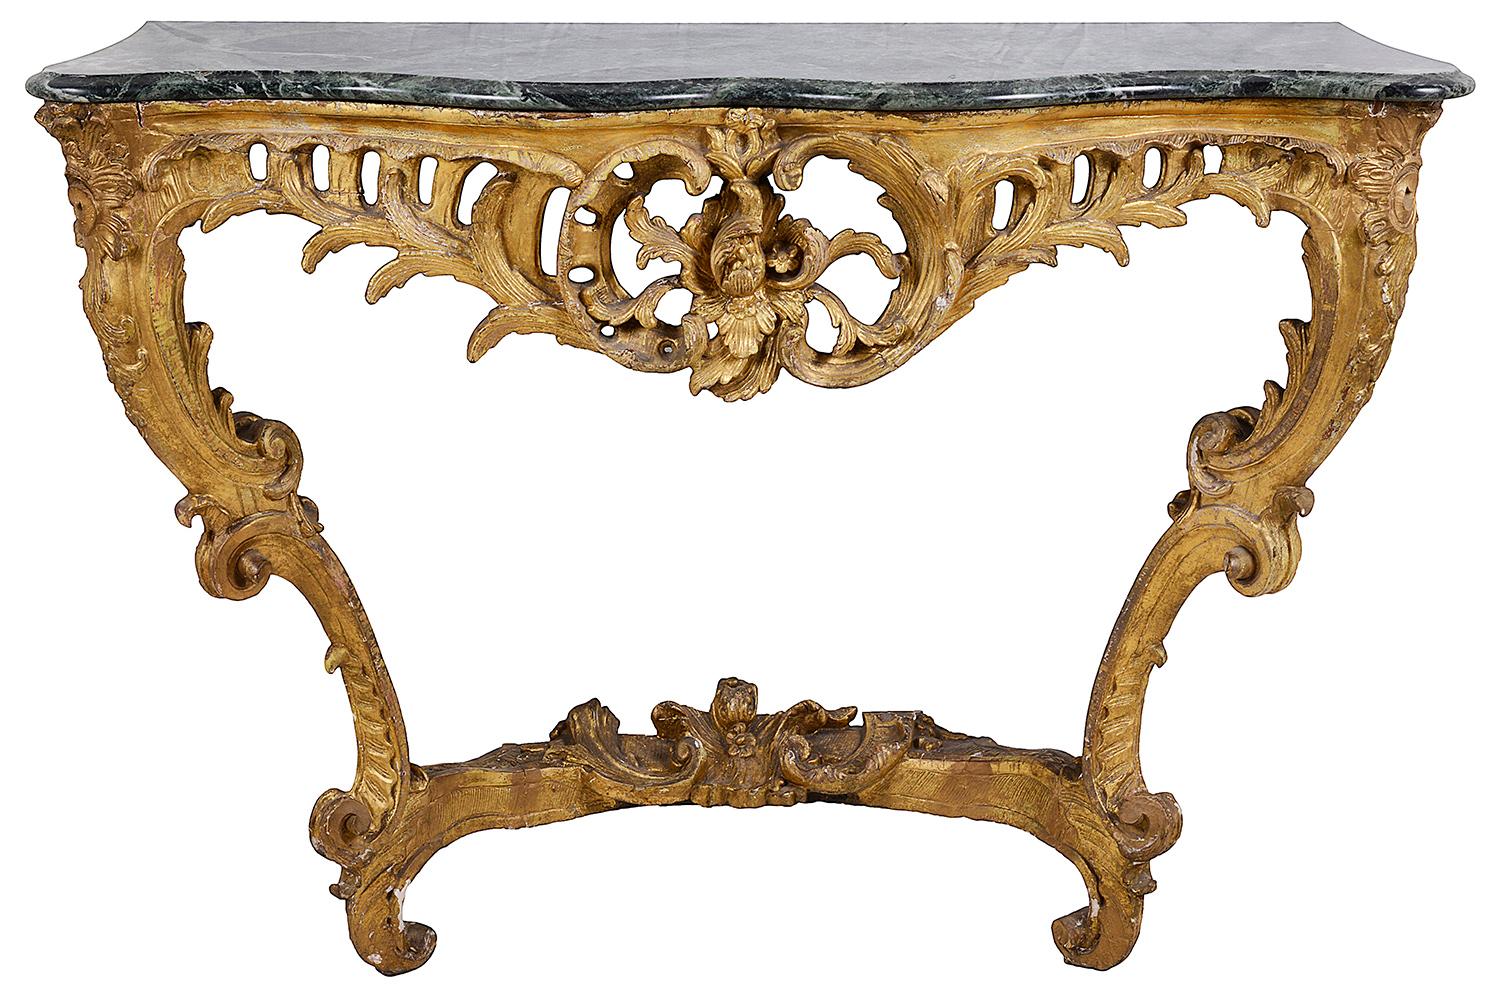 A good quality pair of French 18th century giltwood console tables, each with later green marble tops. wonderful carved and pierced scrolling foliate decoration, united by a stretcher below.